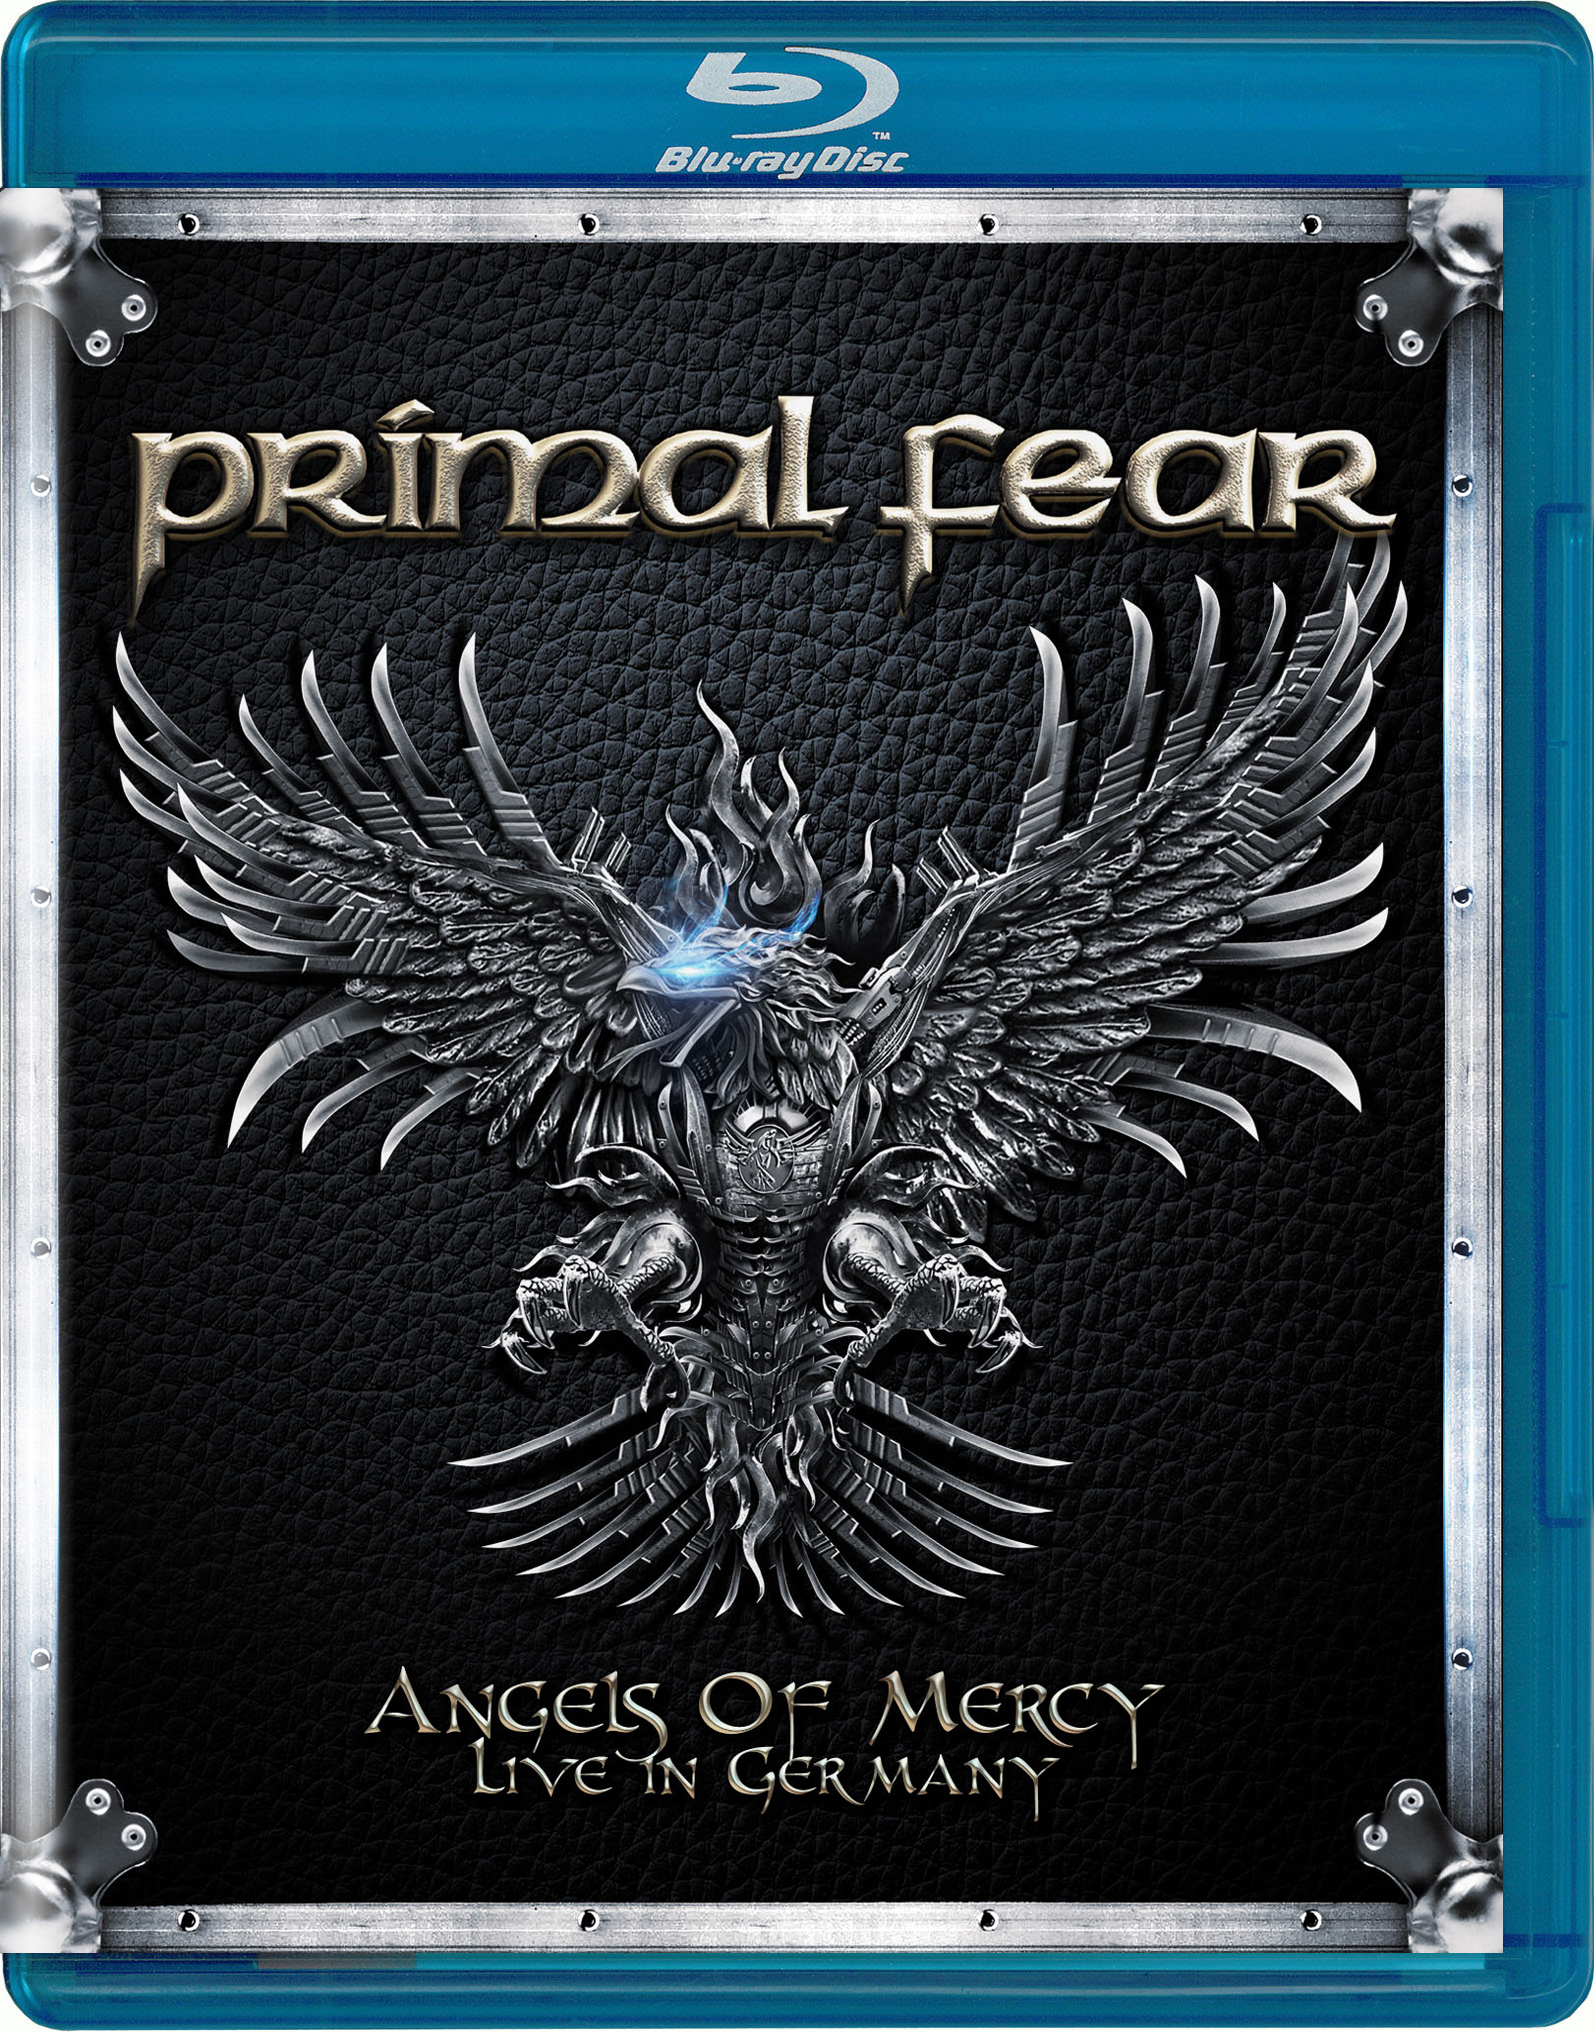 PRIMAL FEAR - Angels of Mercy – Live in Germany